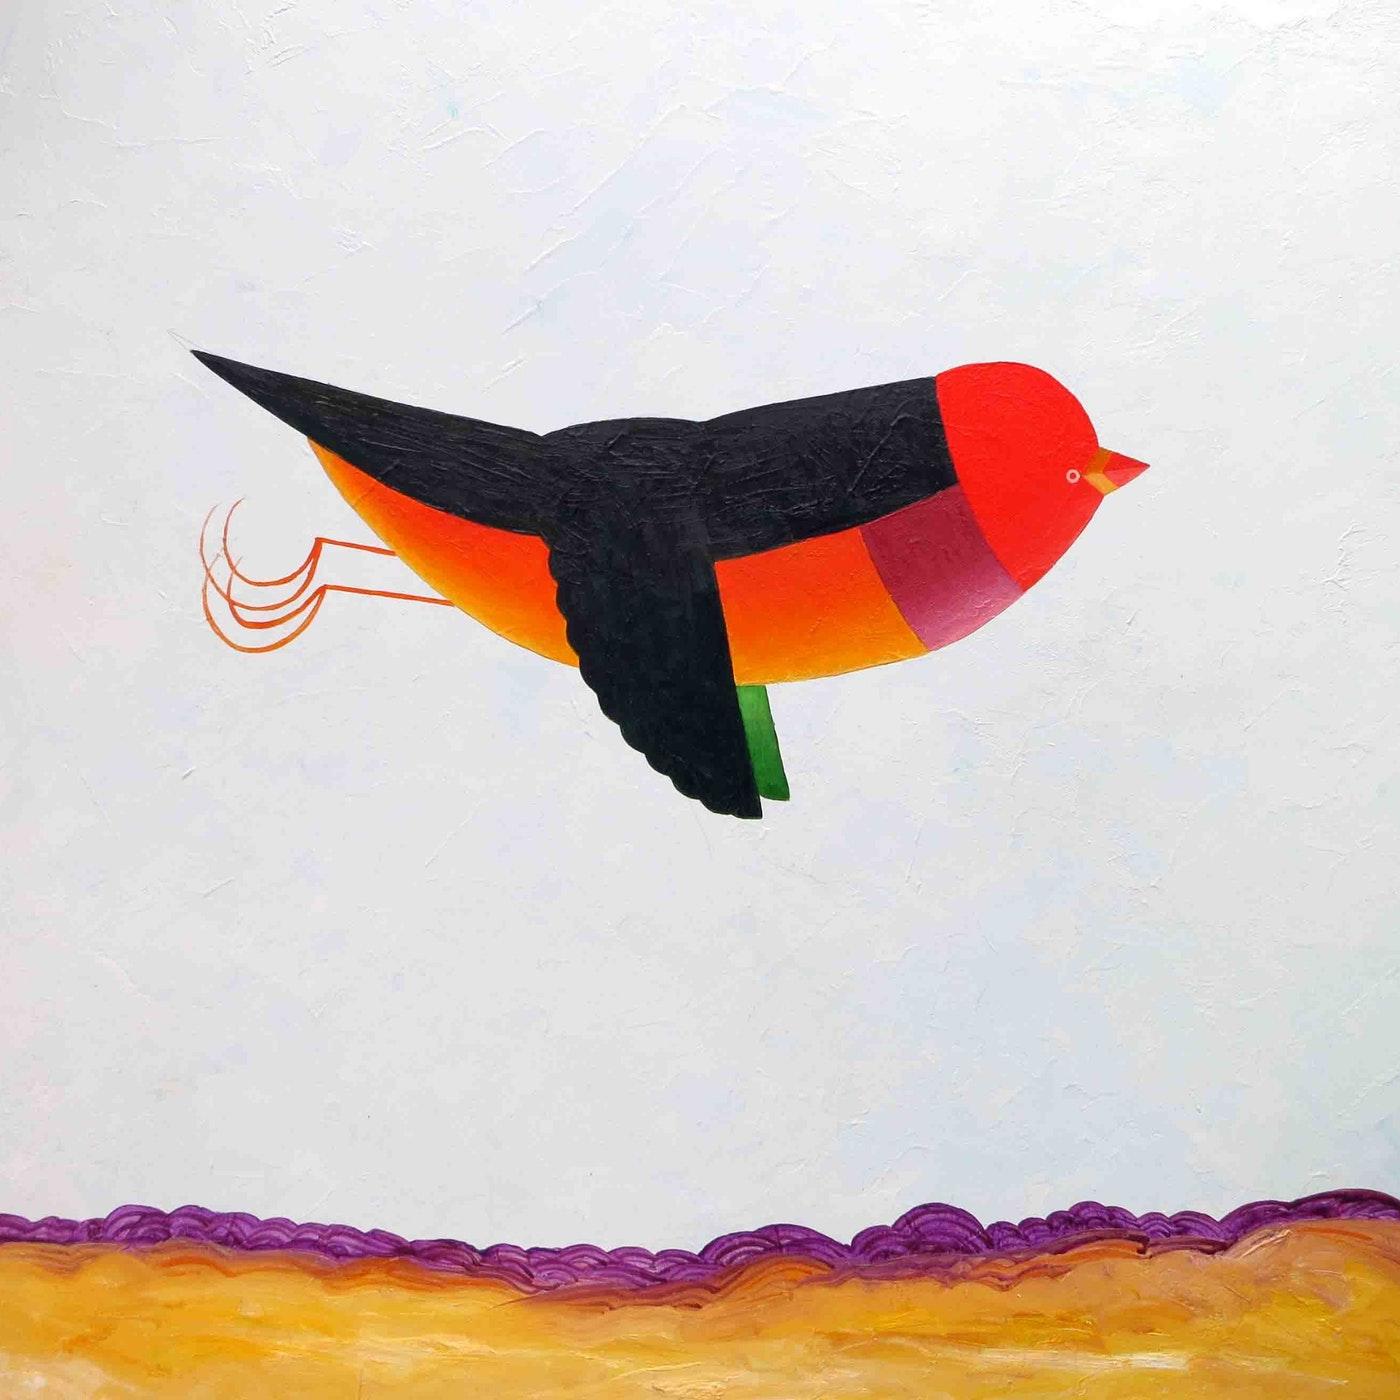 Over drylands - Gould Finch - Contemporary Painting by John Graham